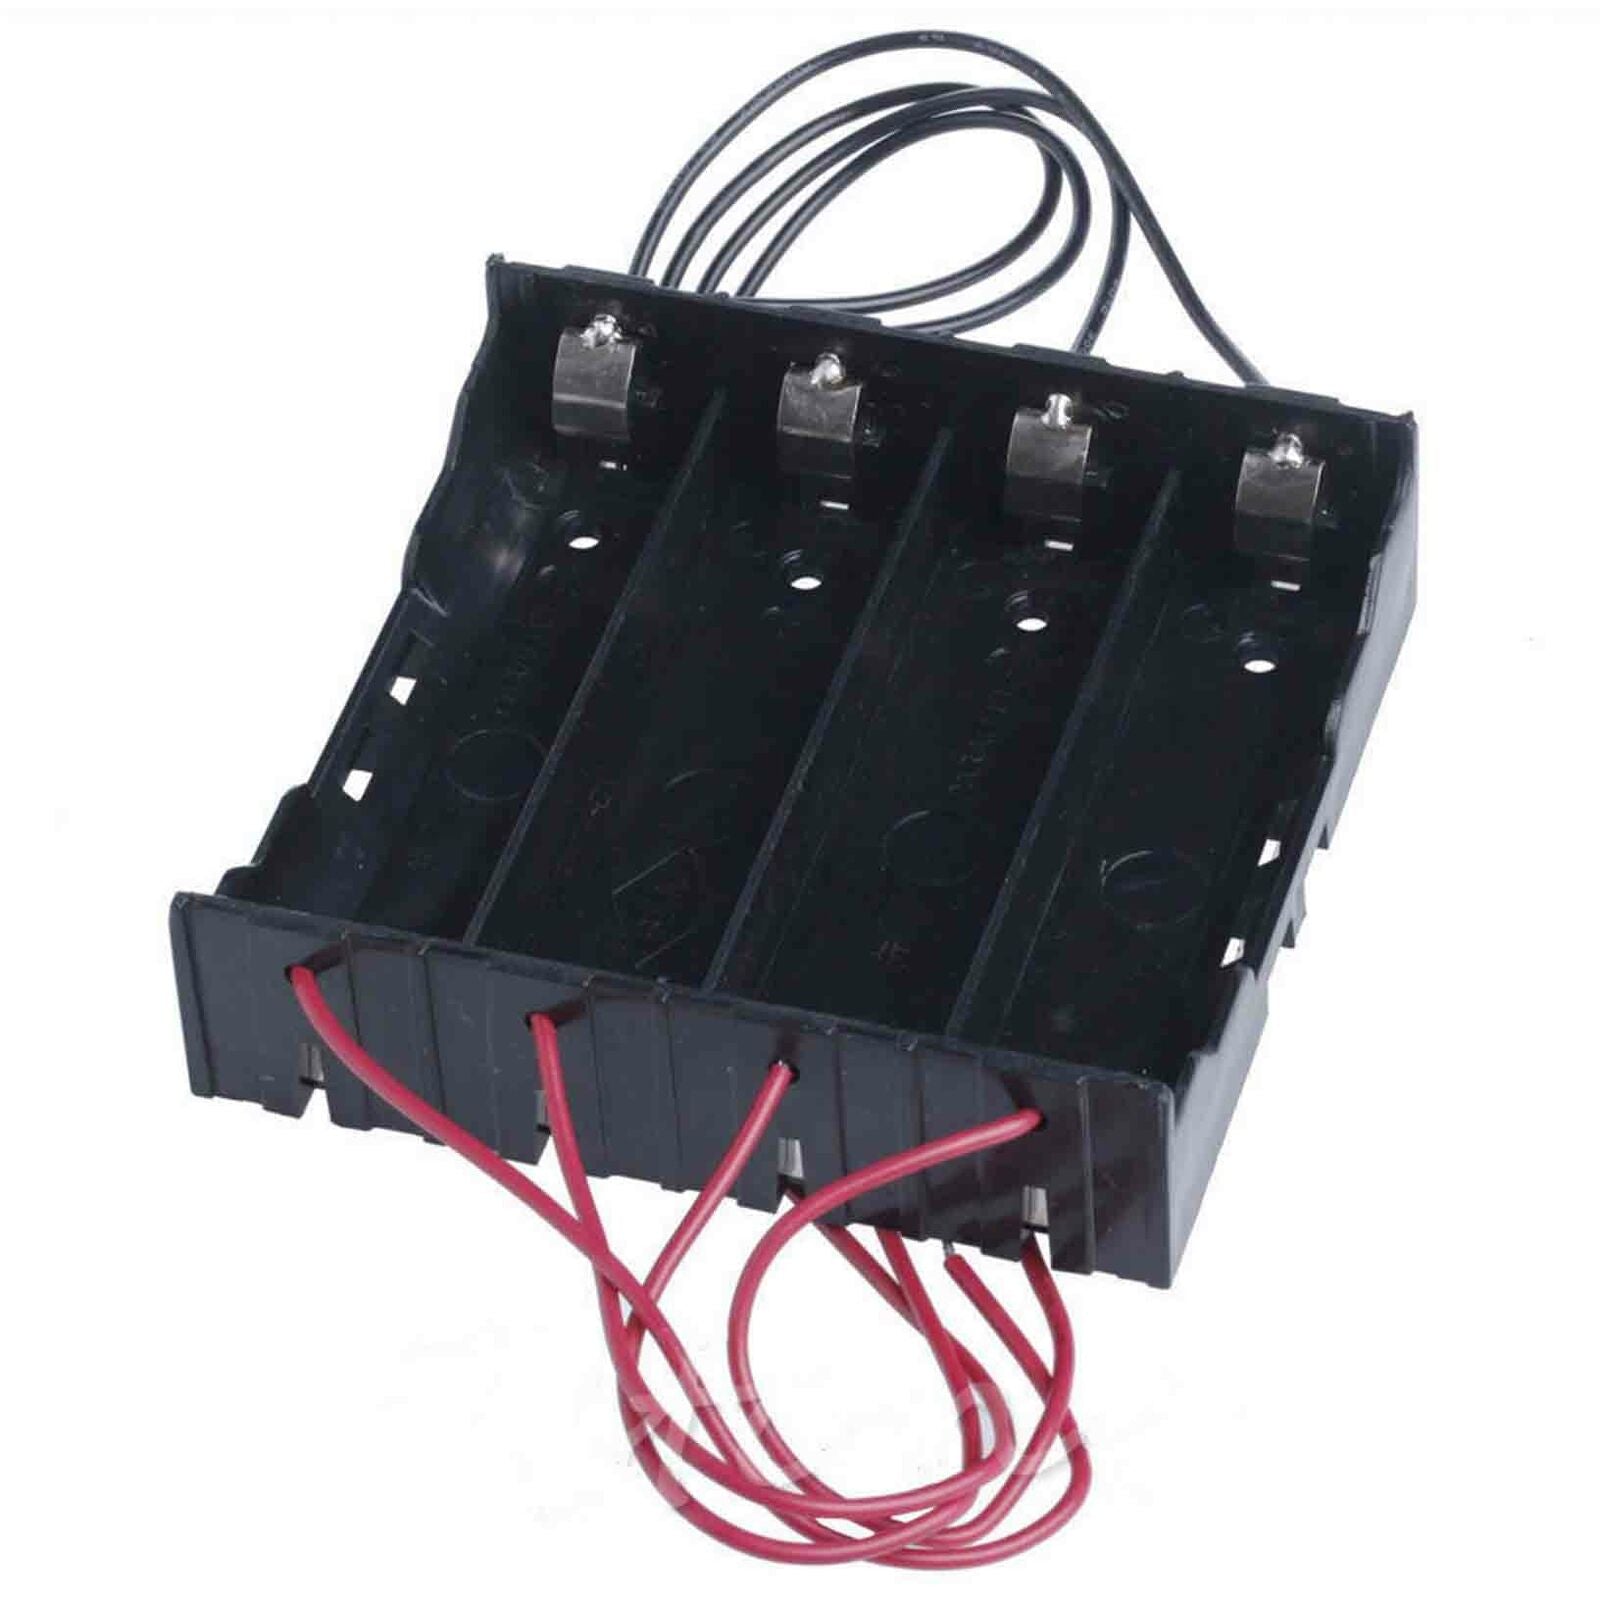 Plastic Battery Holder Storage Box Case For 4x 18650 Rechargeable Battery 1Pc